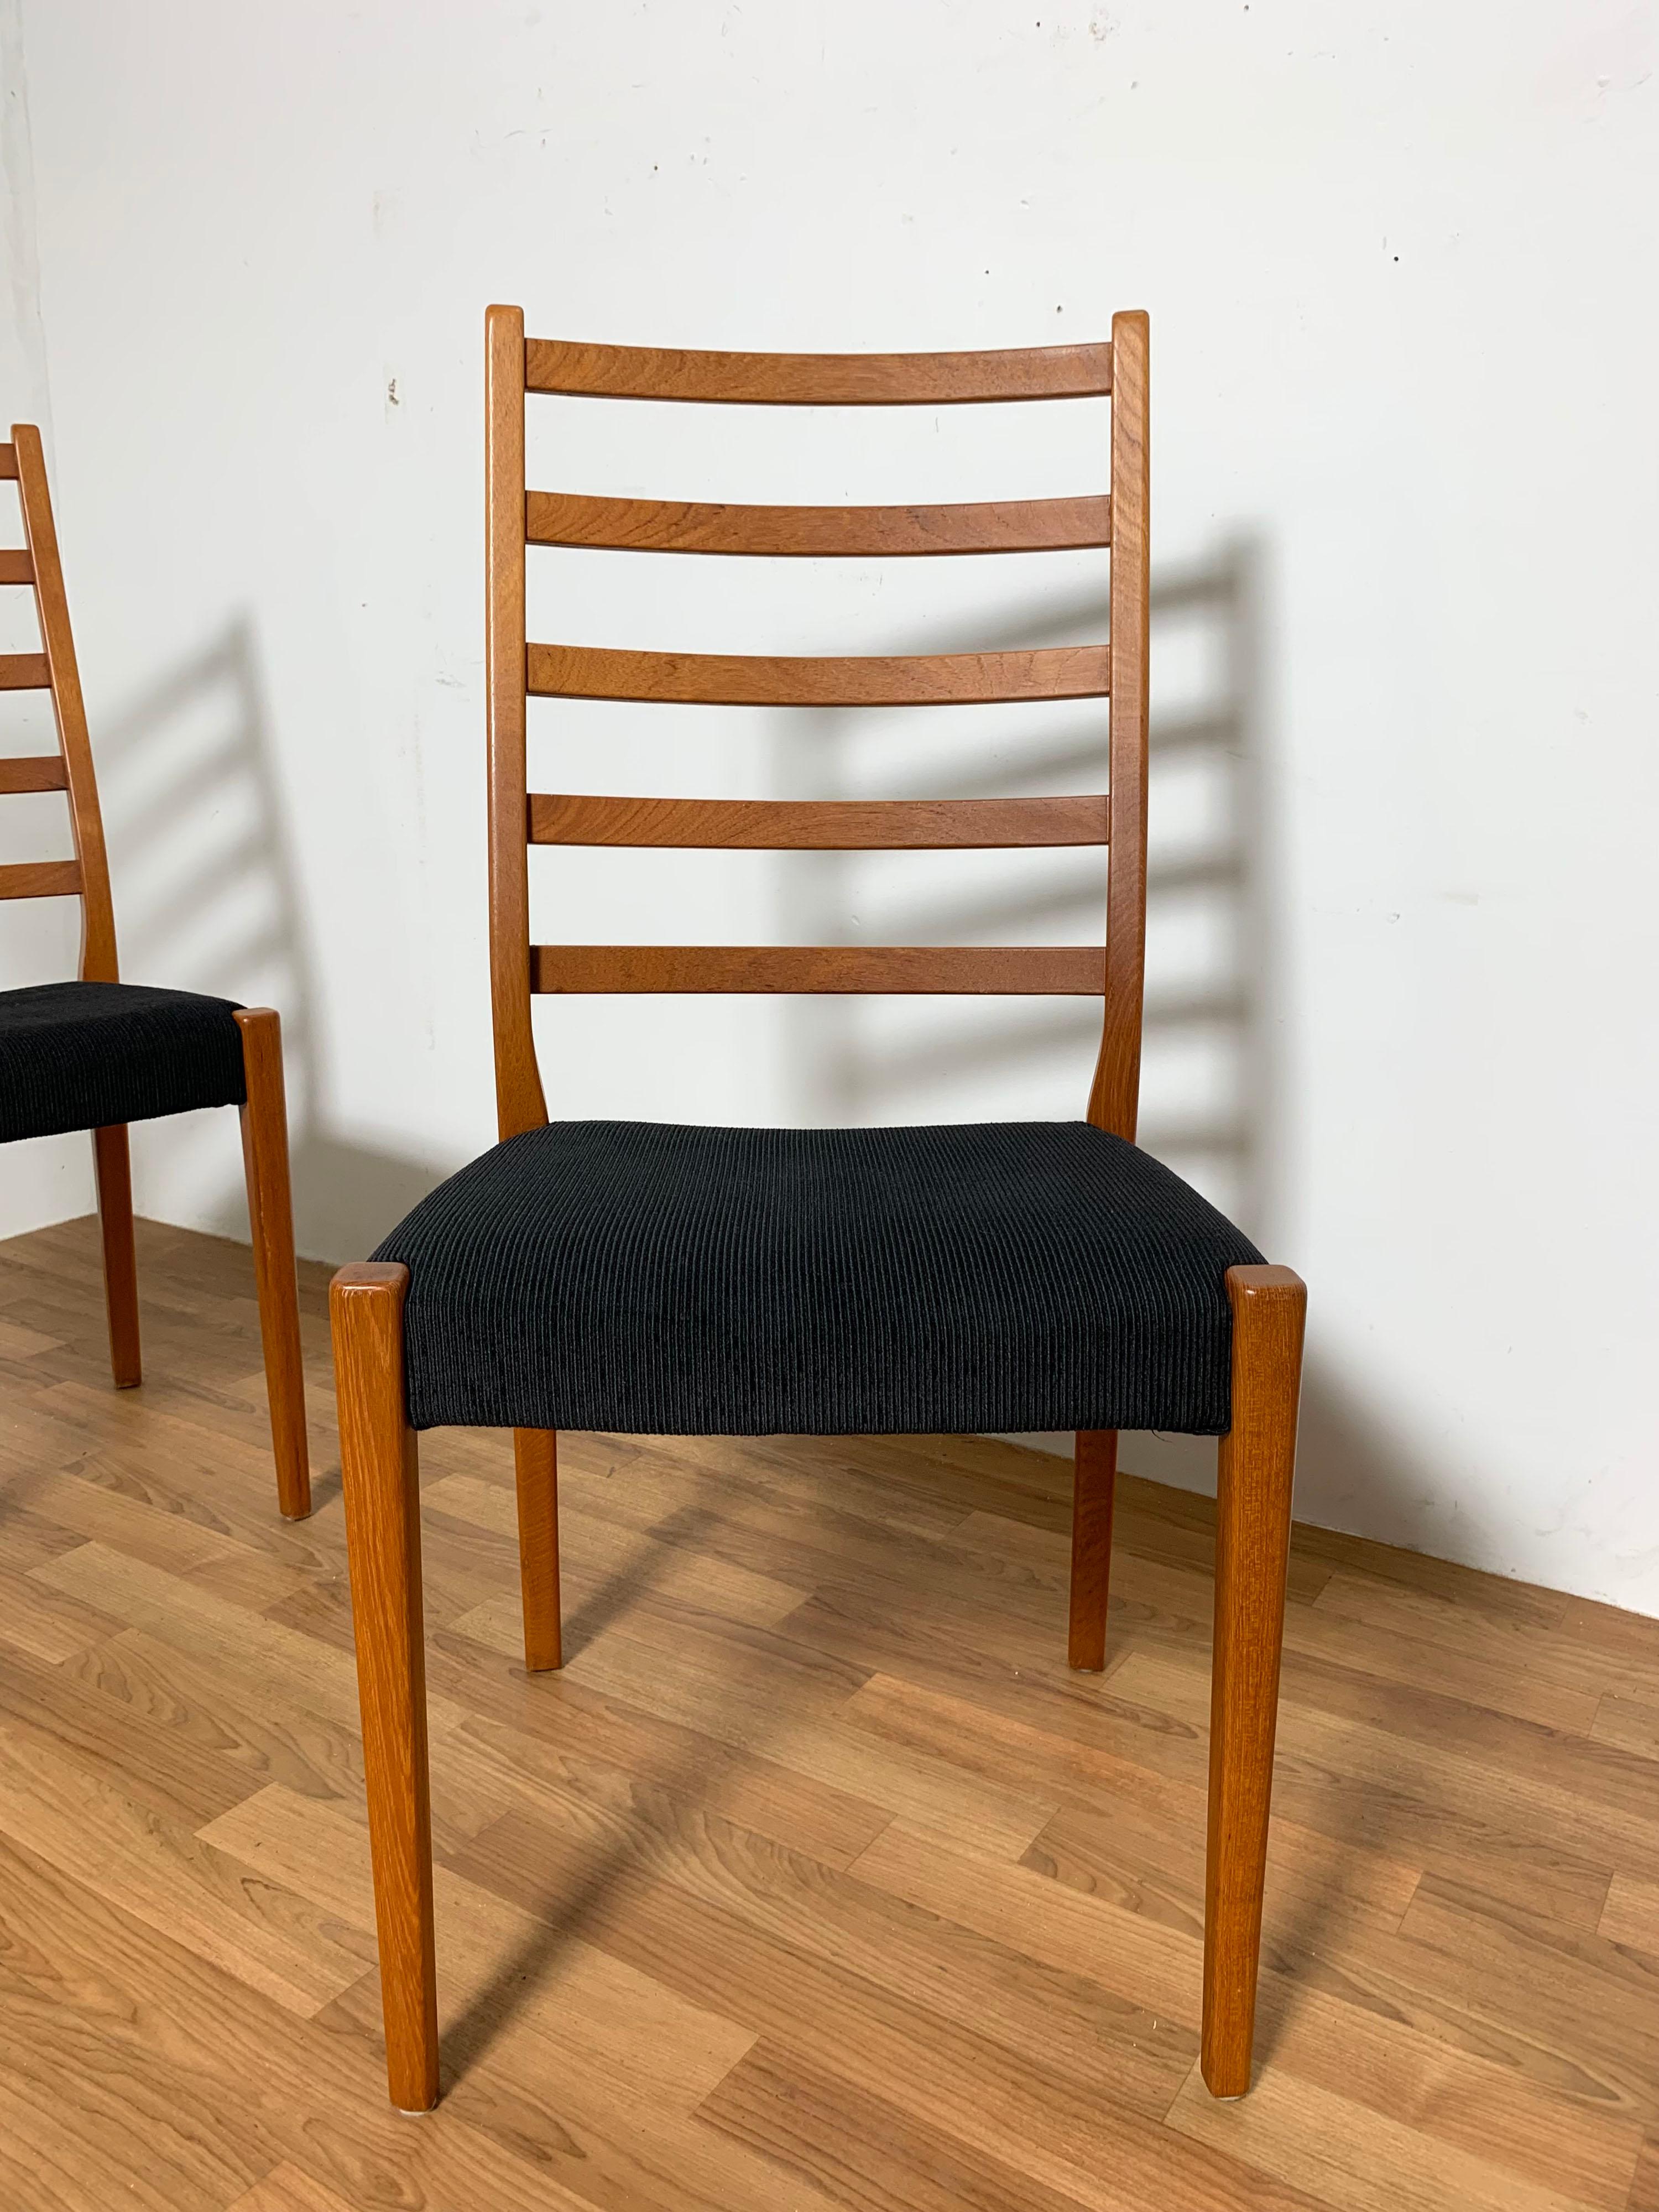 Set of six elegant teak ladder back dining chairs by Svegards of Markaryd, made in Sweden, circa 1970s.